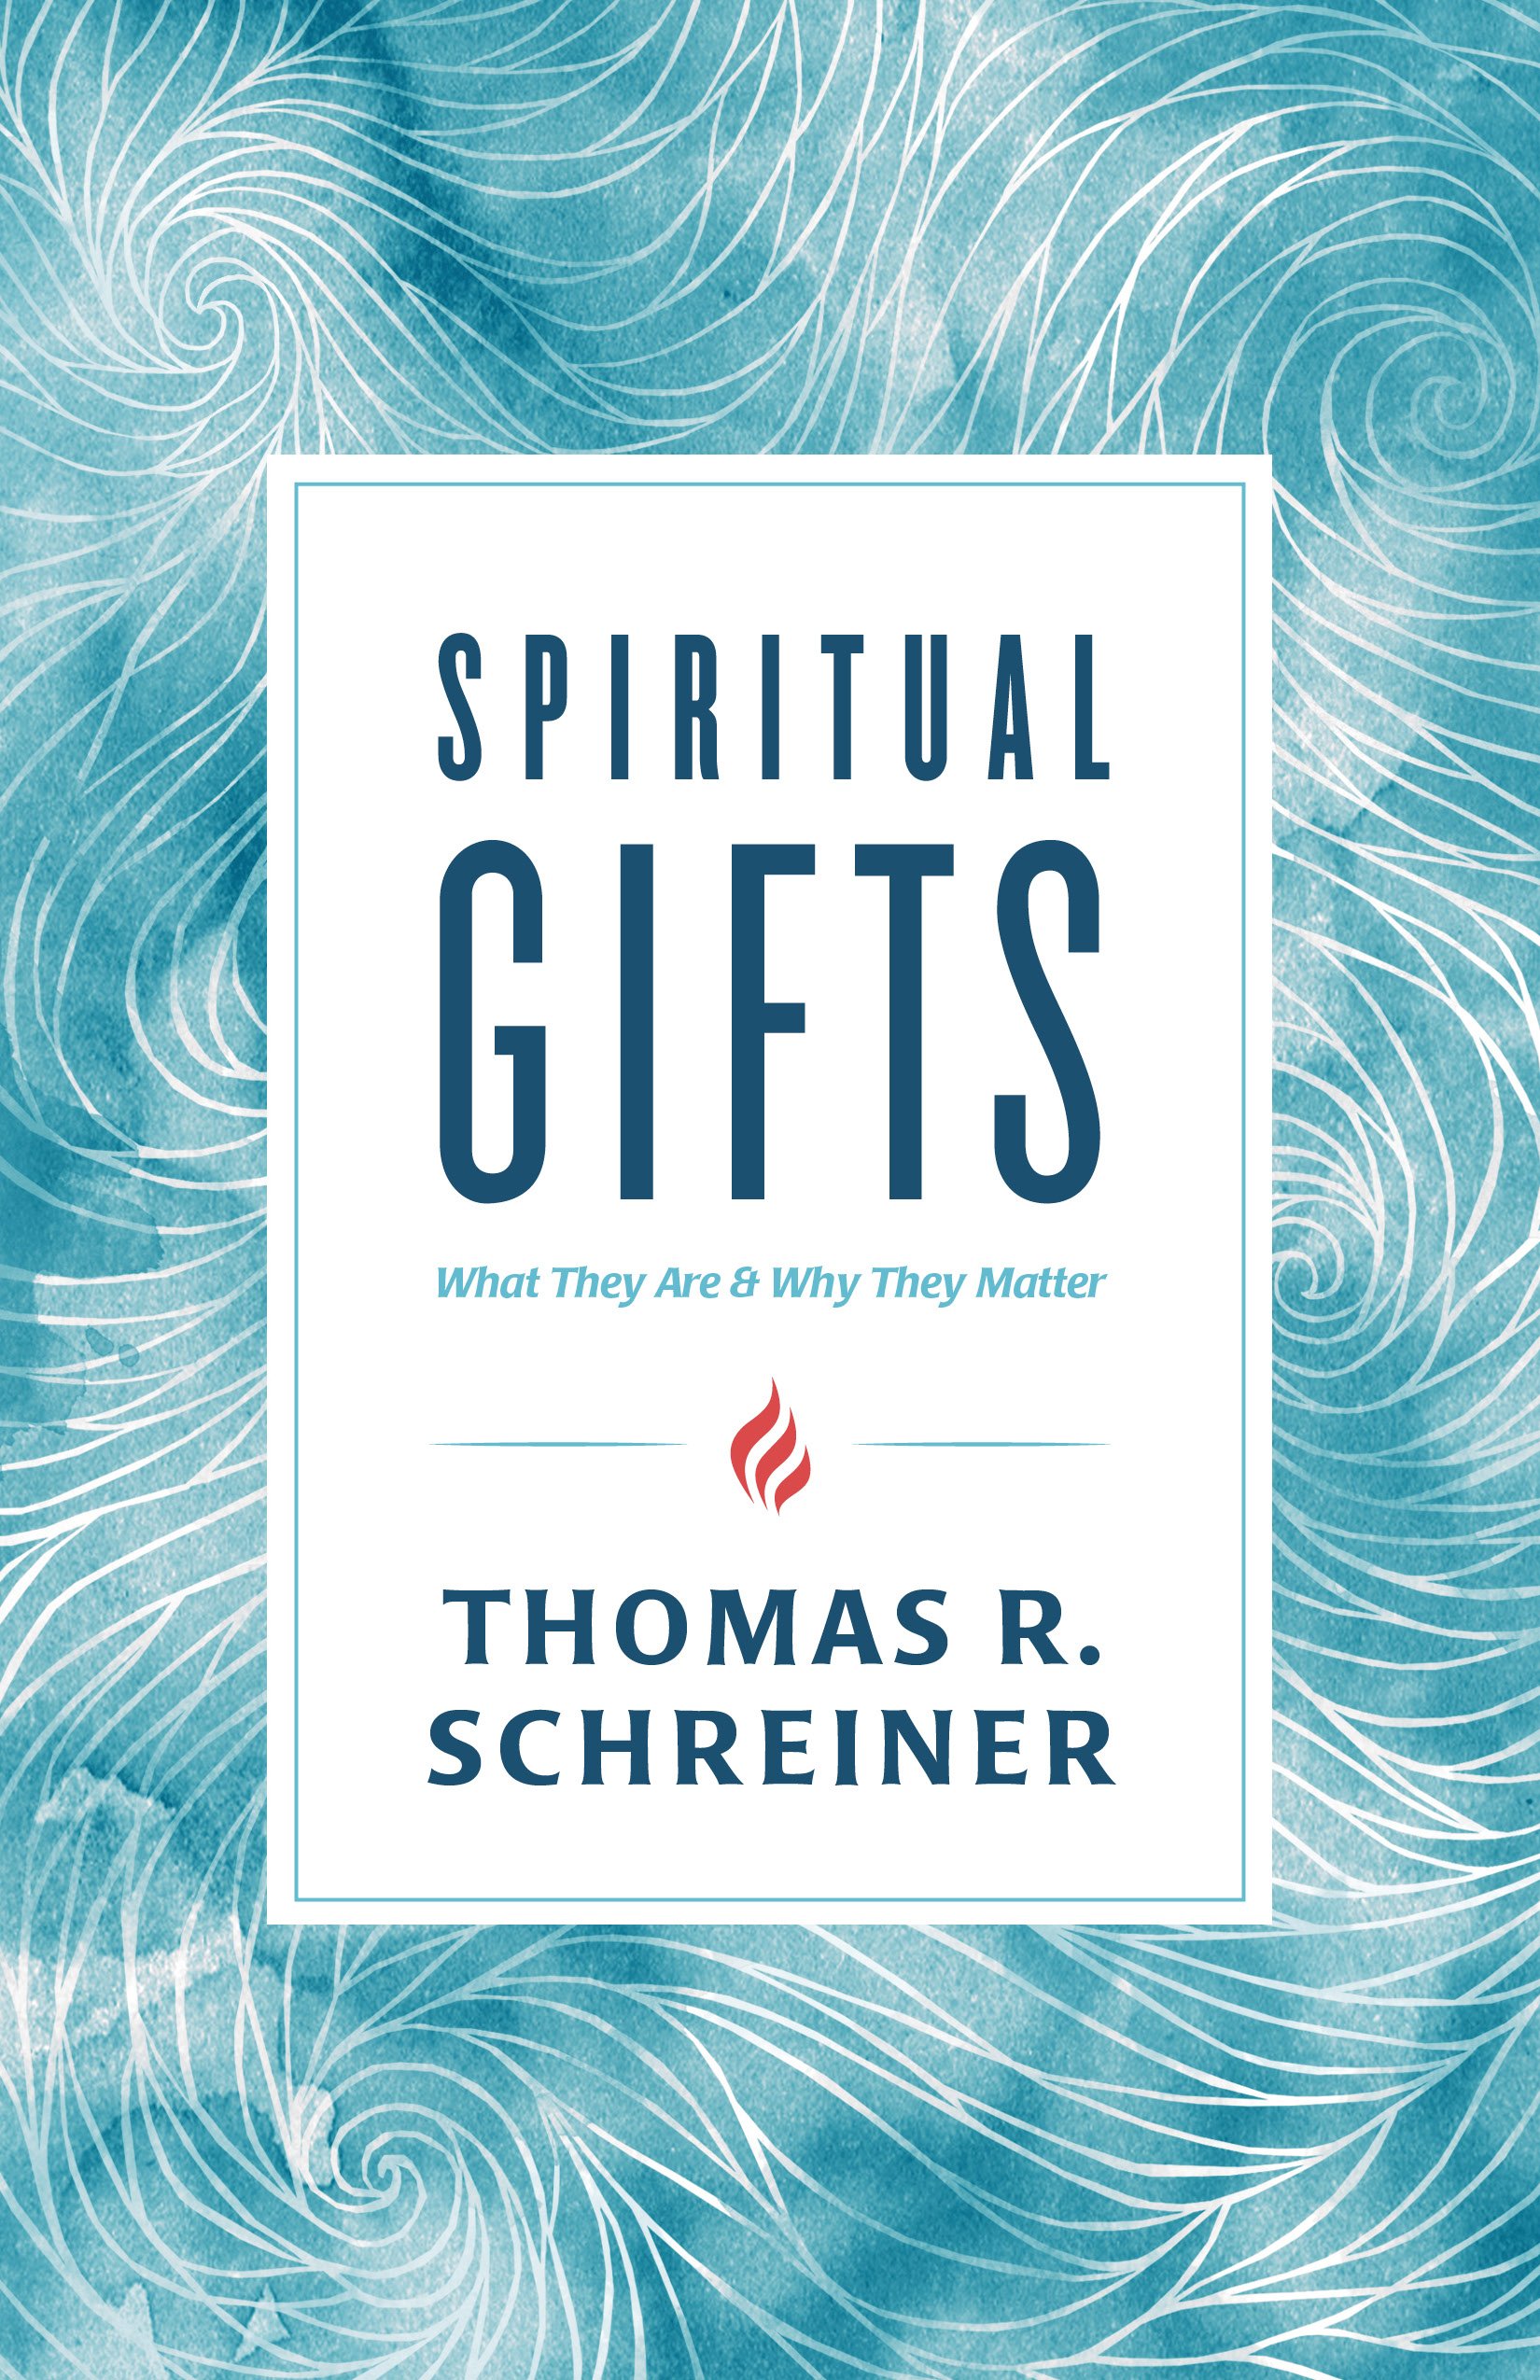 Book Notice: SPIRITUAL GIFTS: WHAT THEY ARE AND WHY THEY MATTER, by Thomas R. Schreiner